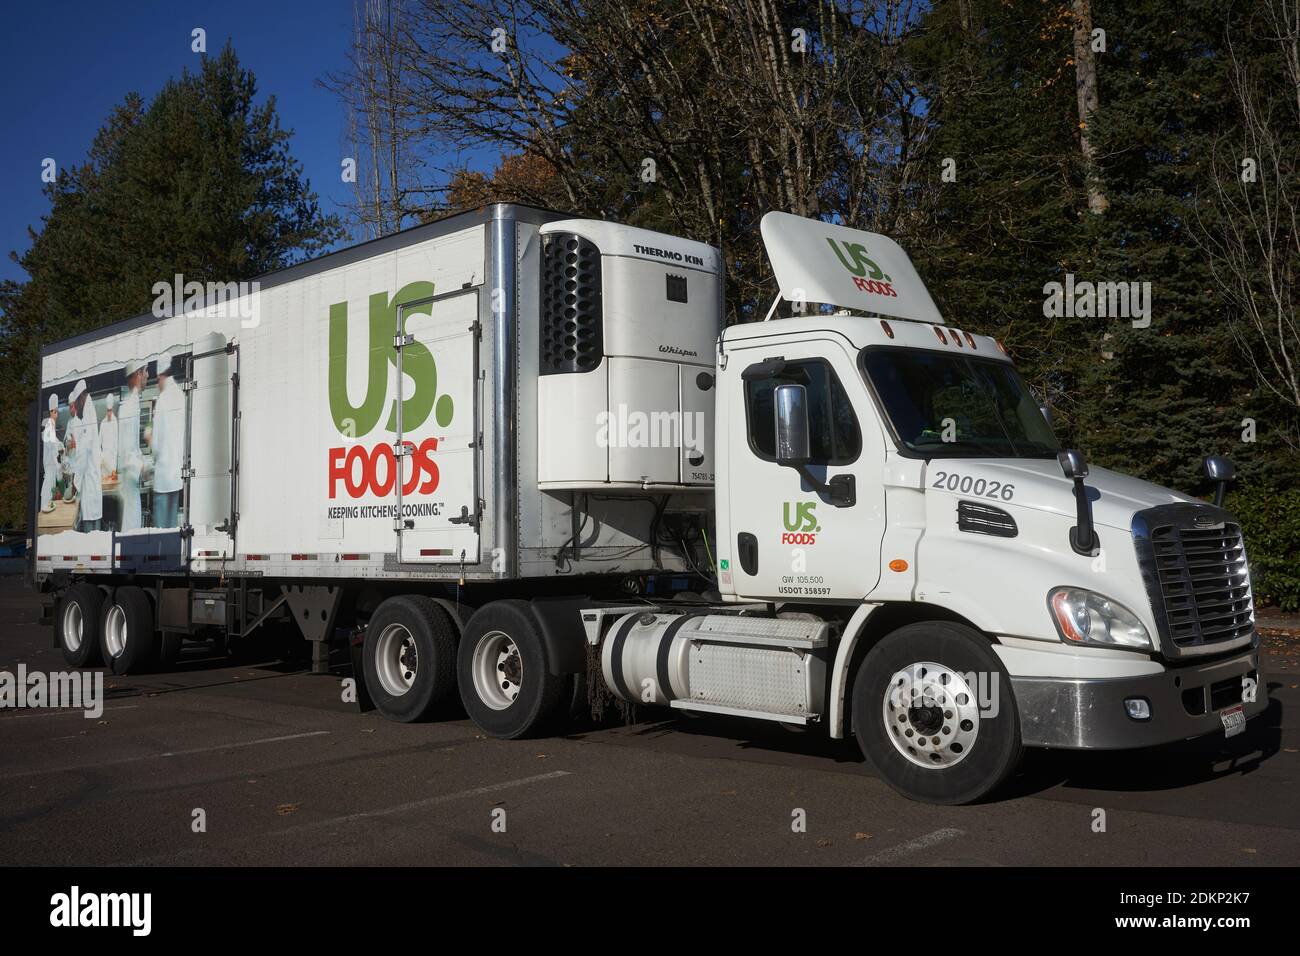 A US Foods branded truck is seen outside a Whole Foods Market in Lake Oswego, Oregon. US Foods is an American foodservice distributor. Stock Photo